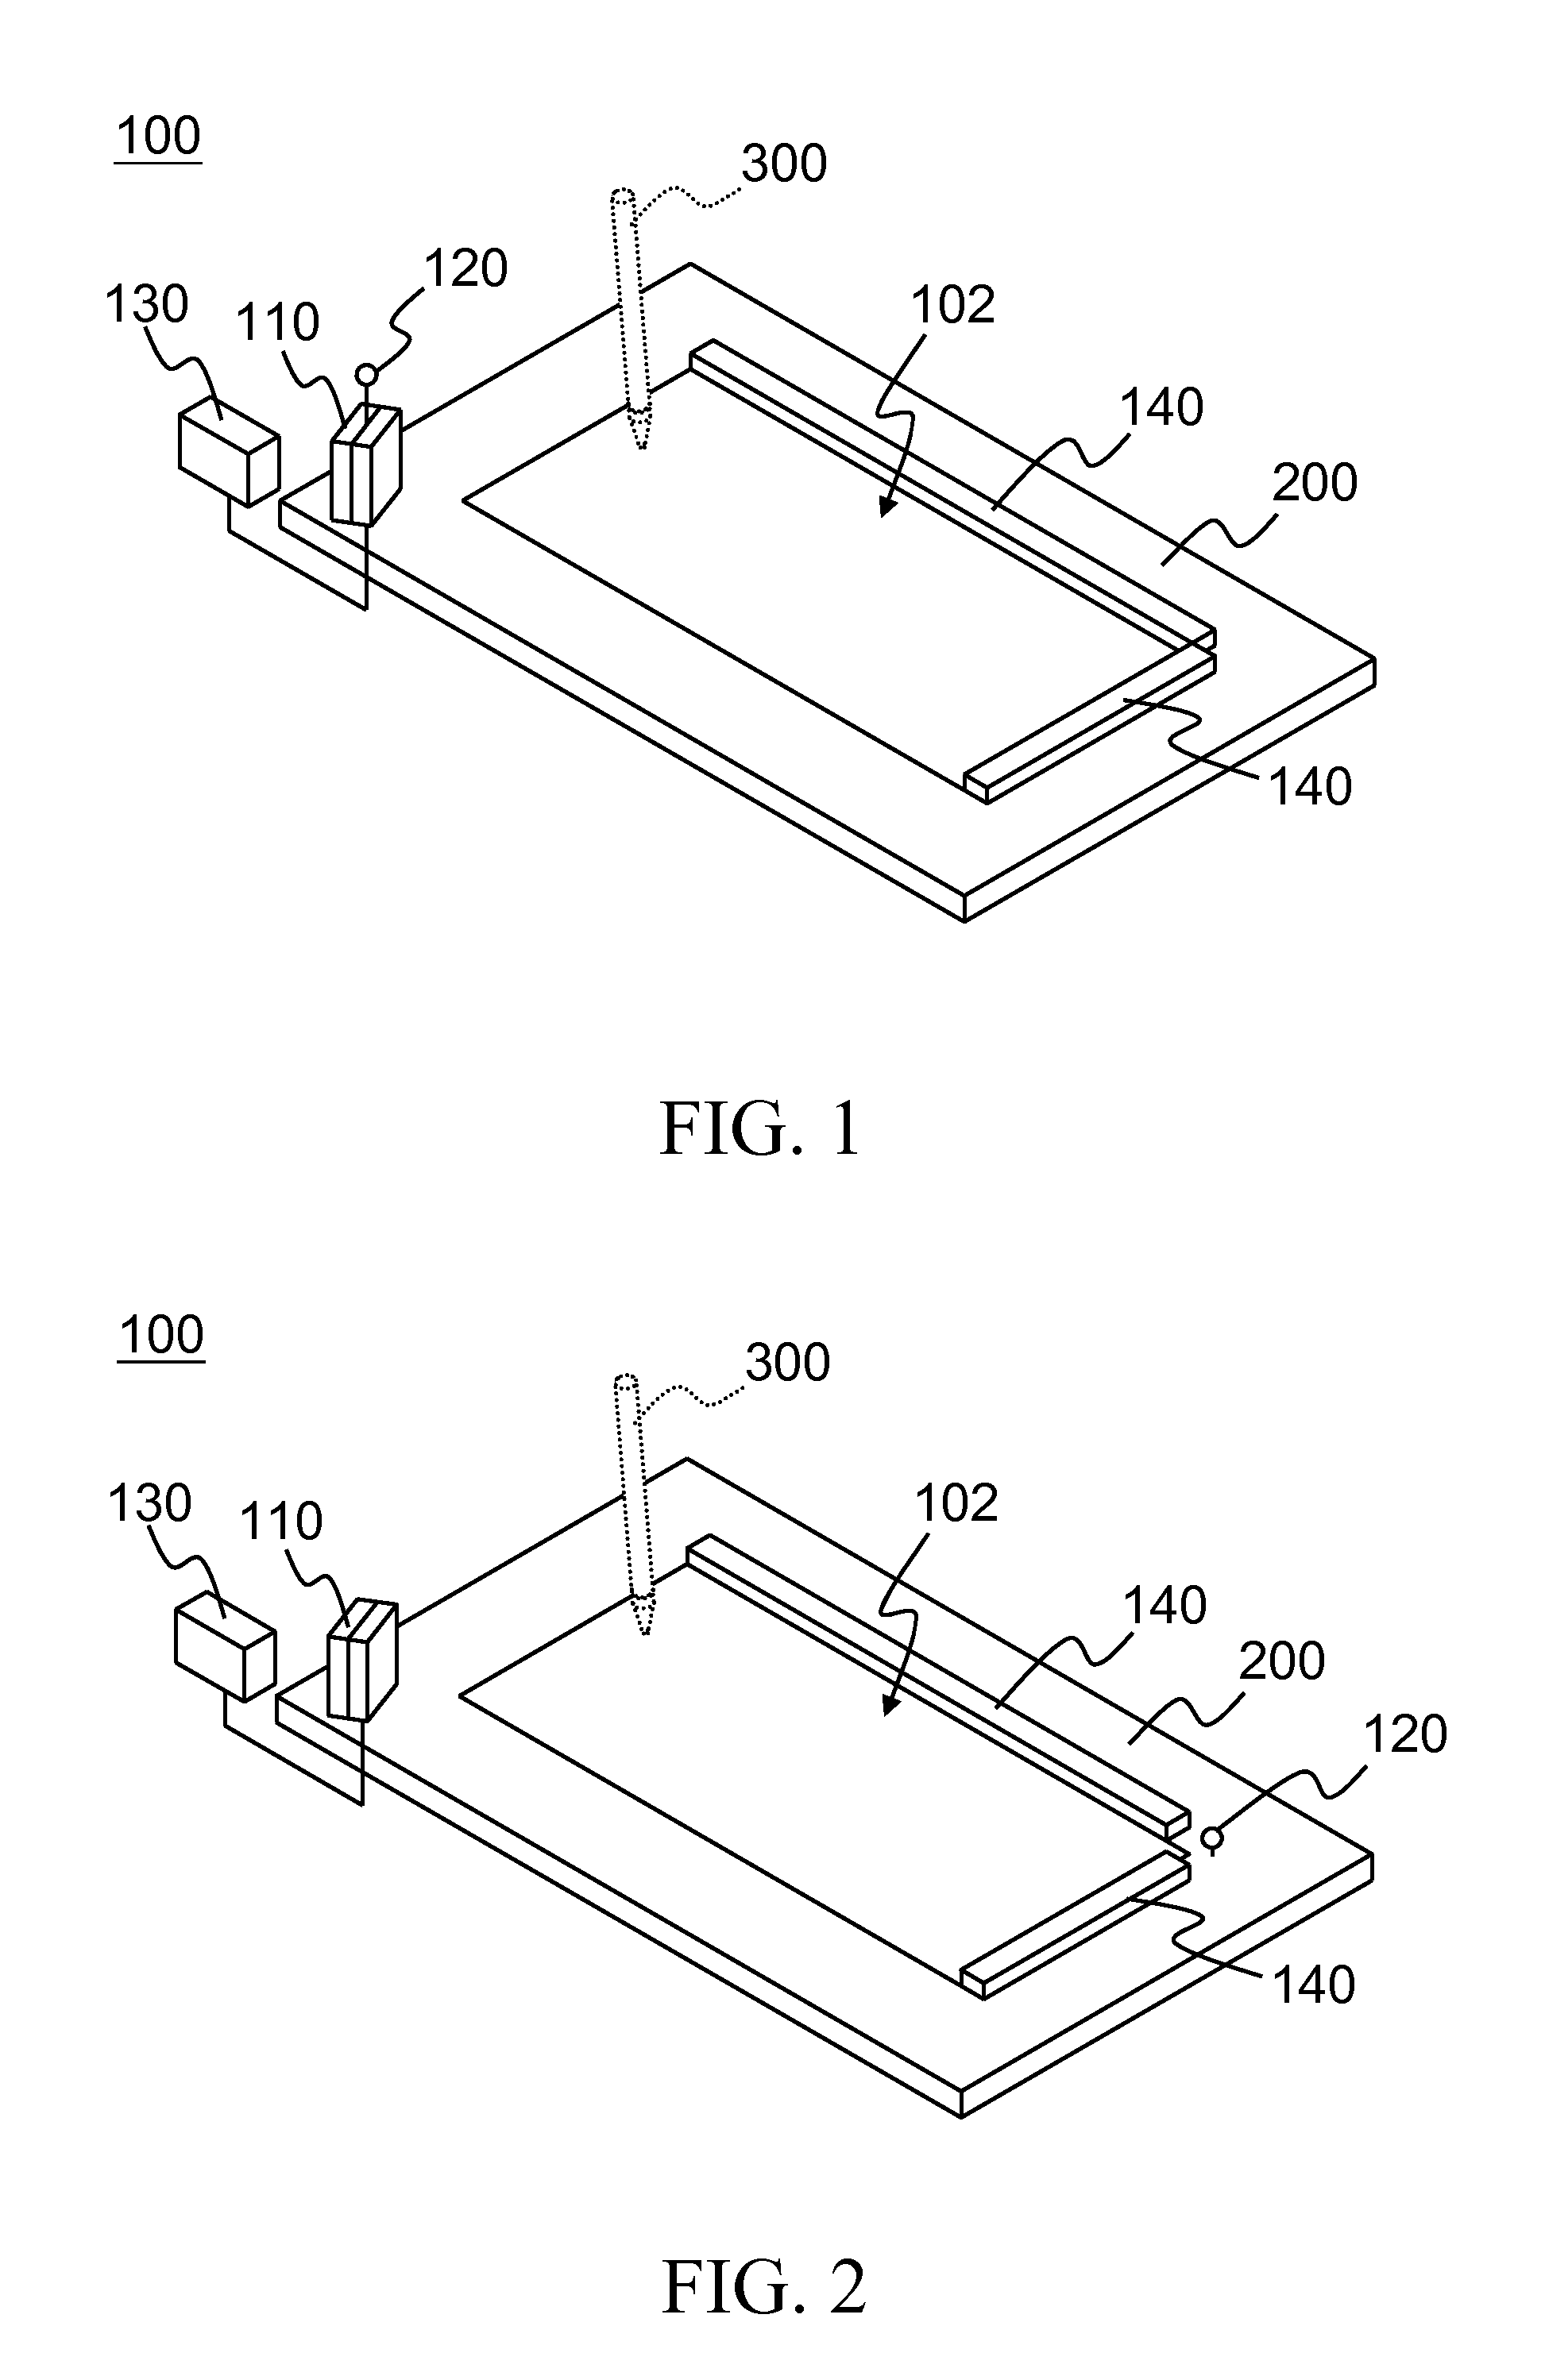 Optical touch device